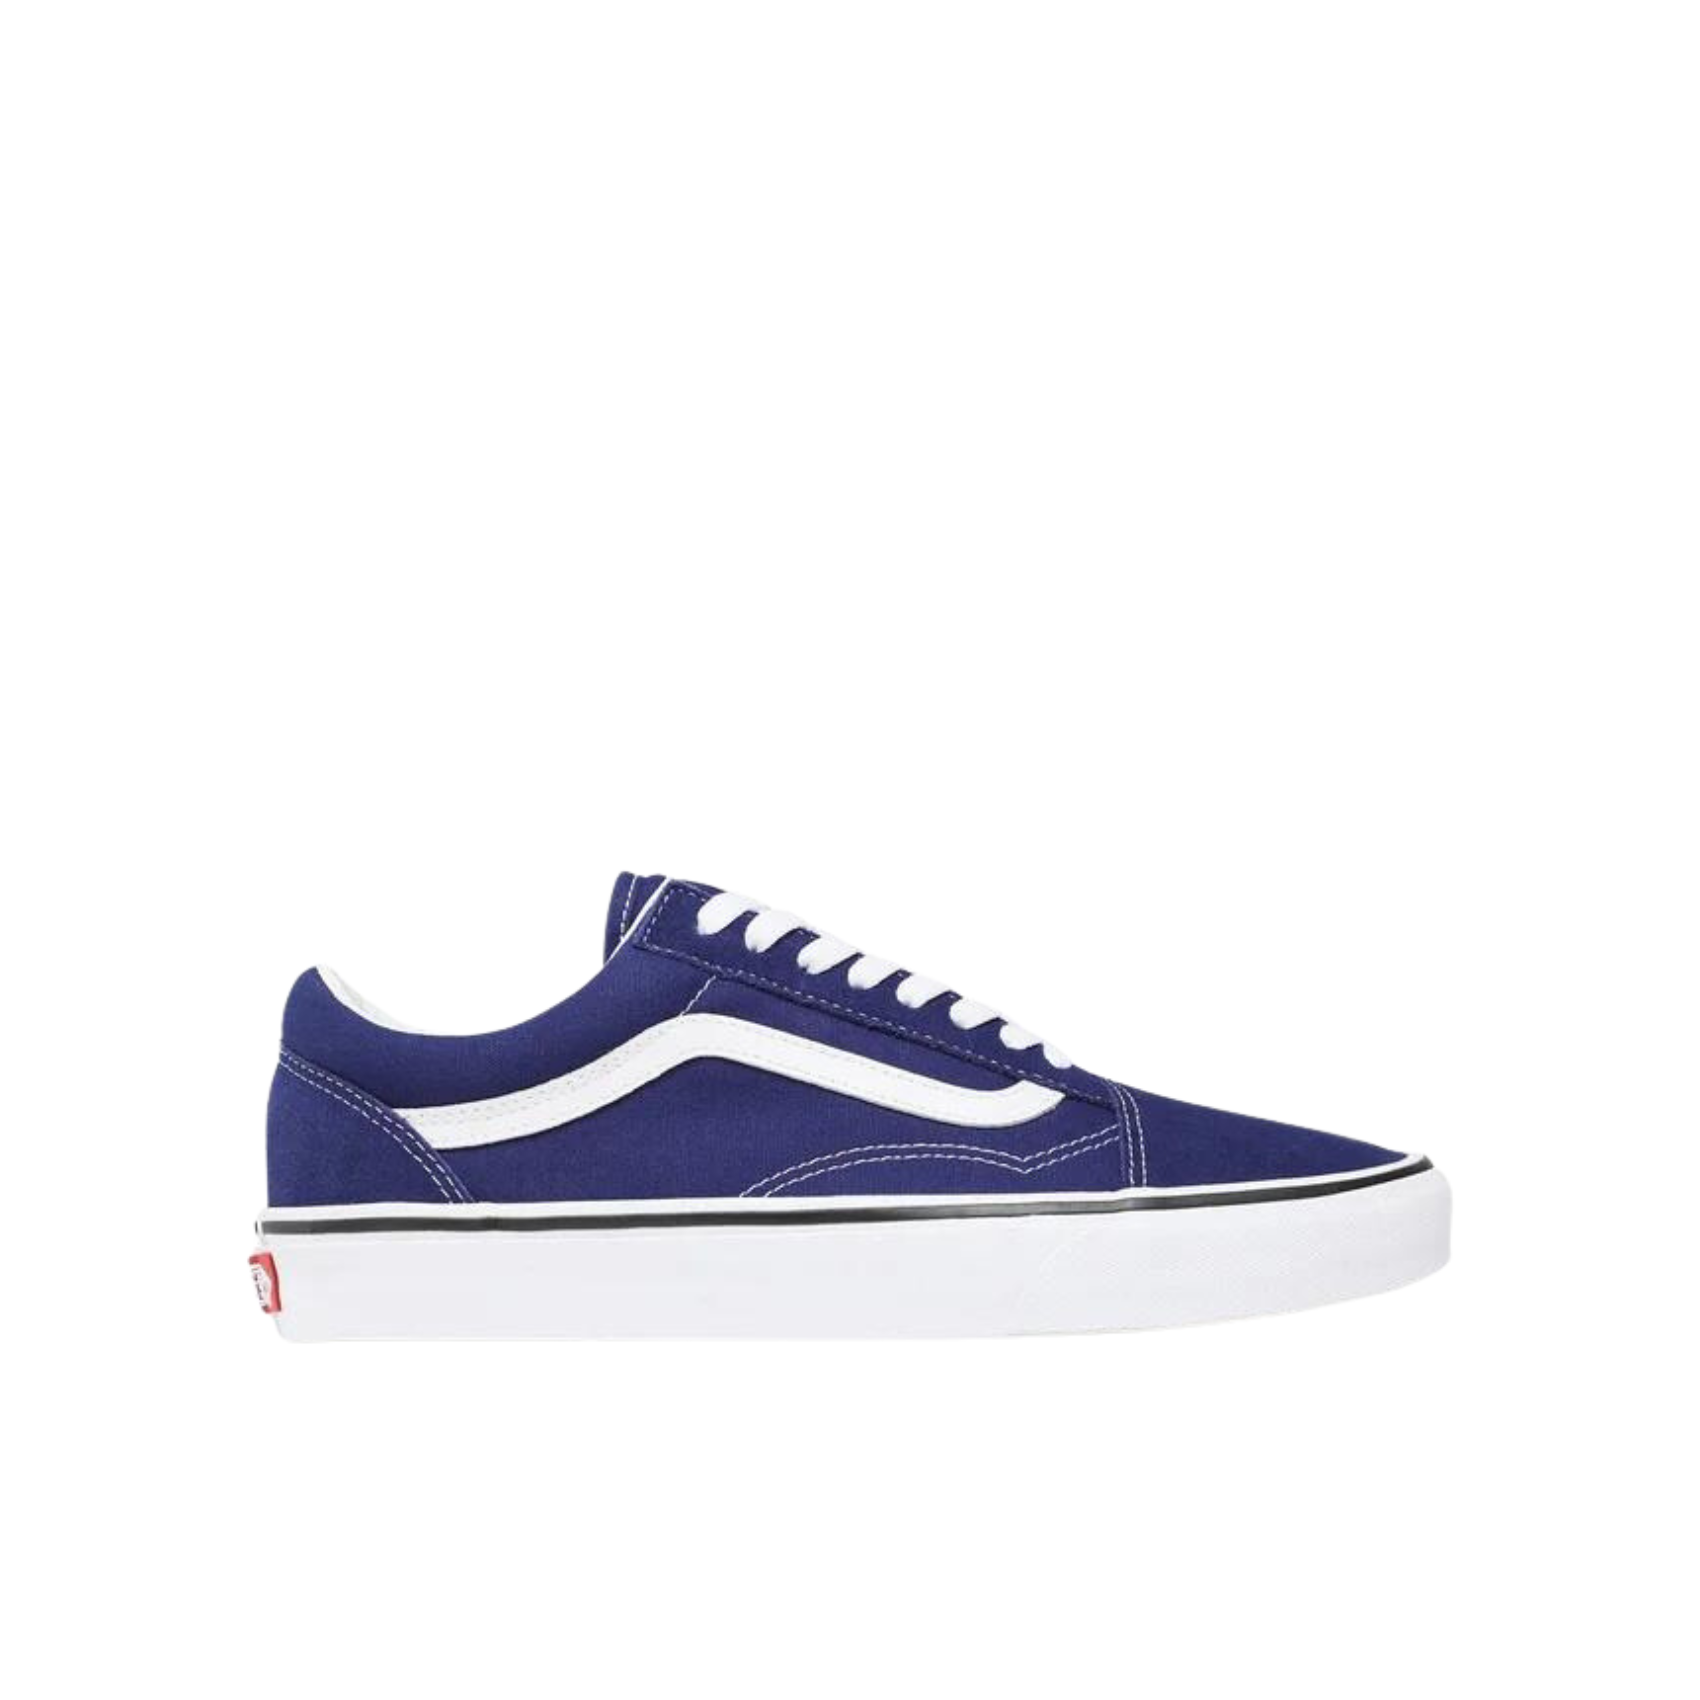 Old Skool - Color Theory Beacon Blue